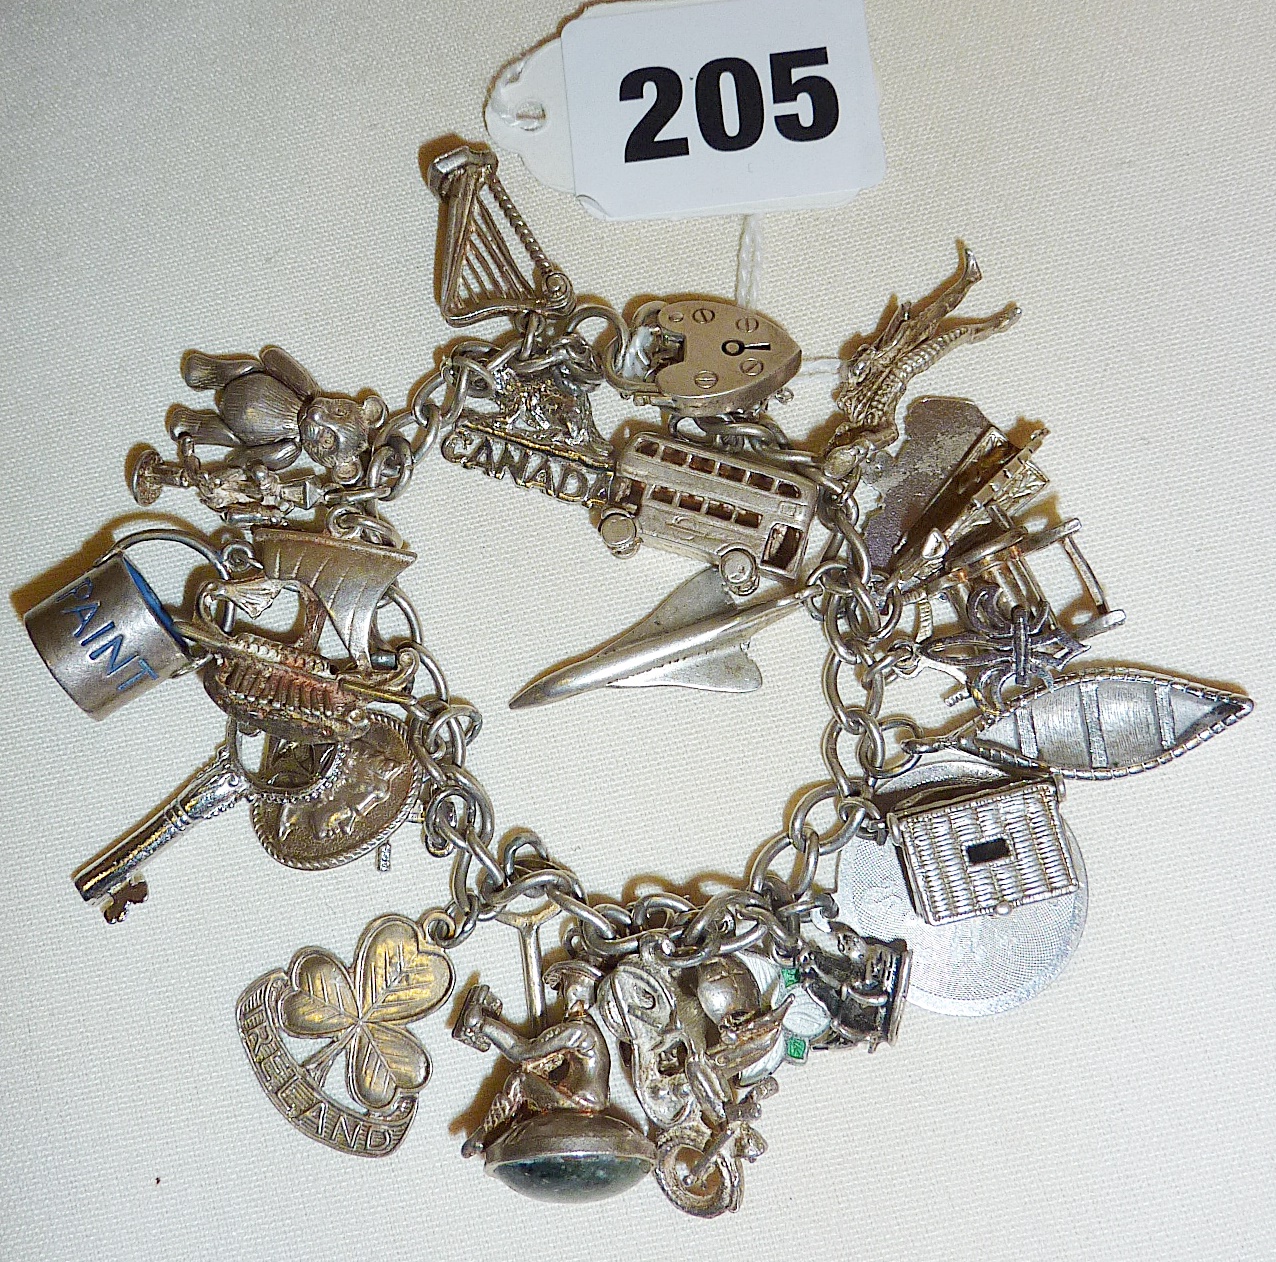 Vintage silver charm bracelet with many charms, some hallmarked, some Continental silver